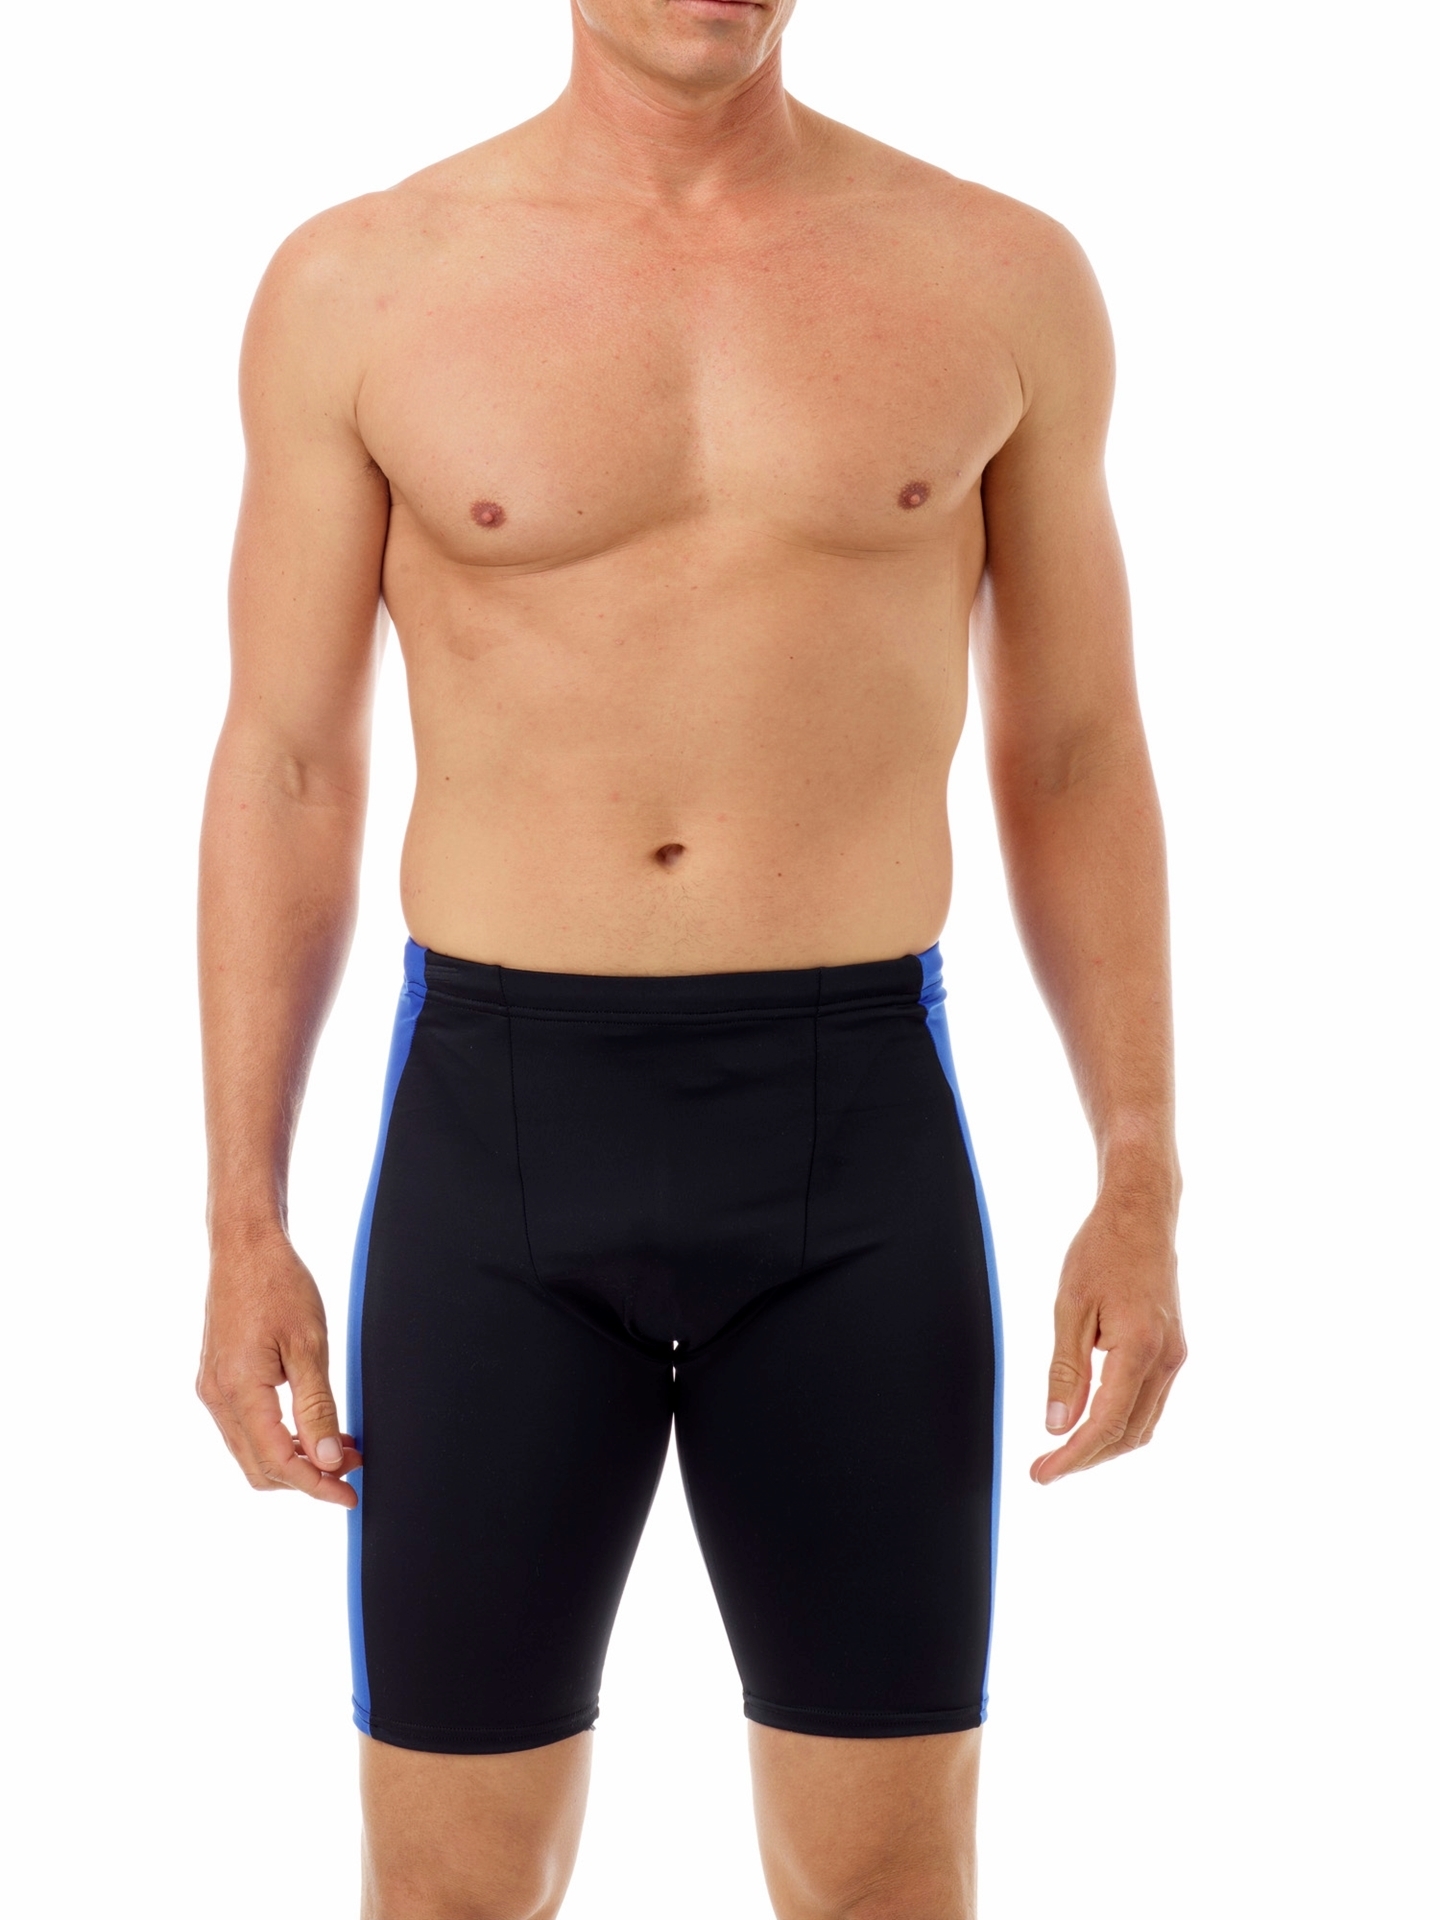 Men's Compression Workout and Swim Shorts, Buy Now at Underworks